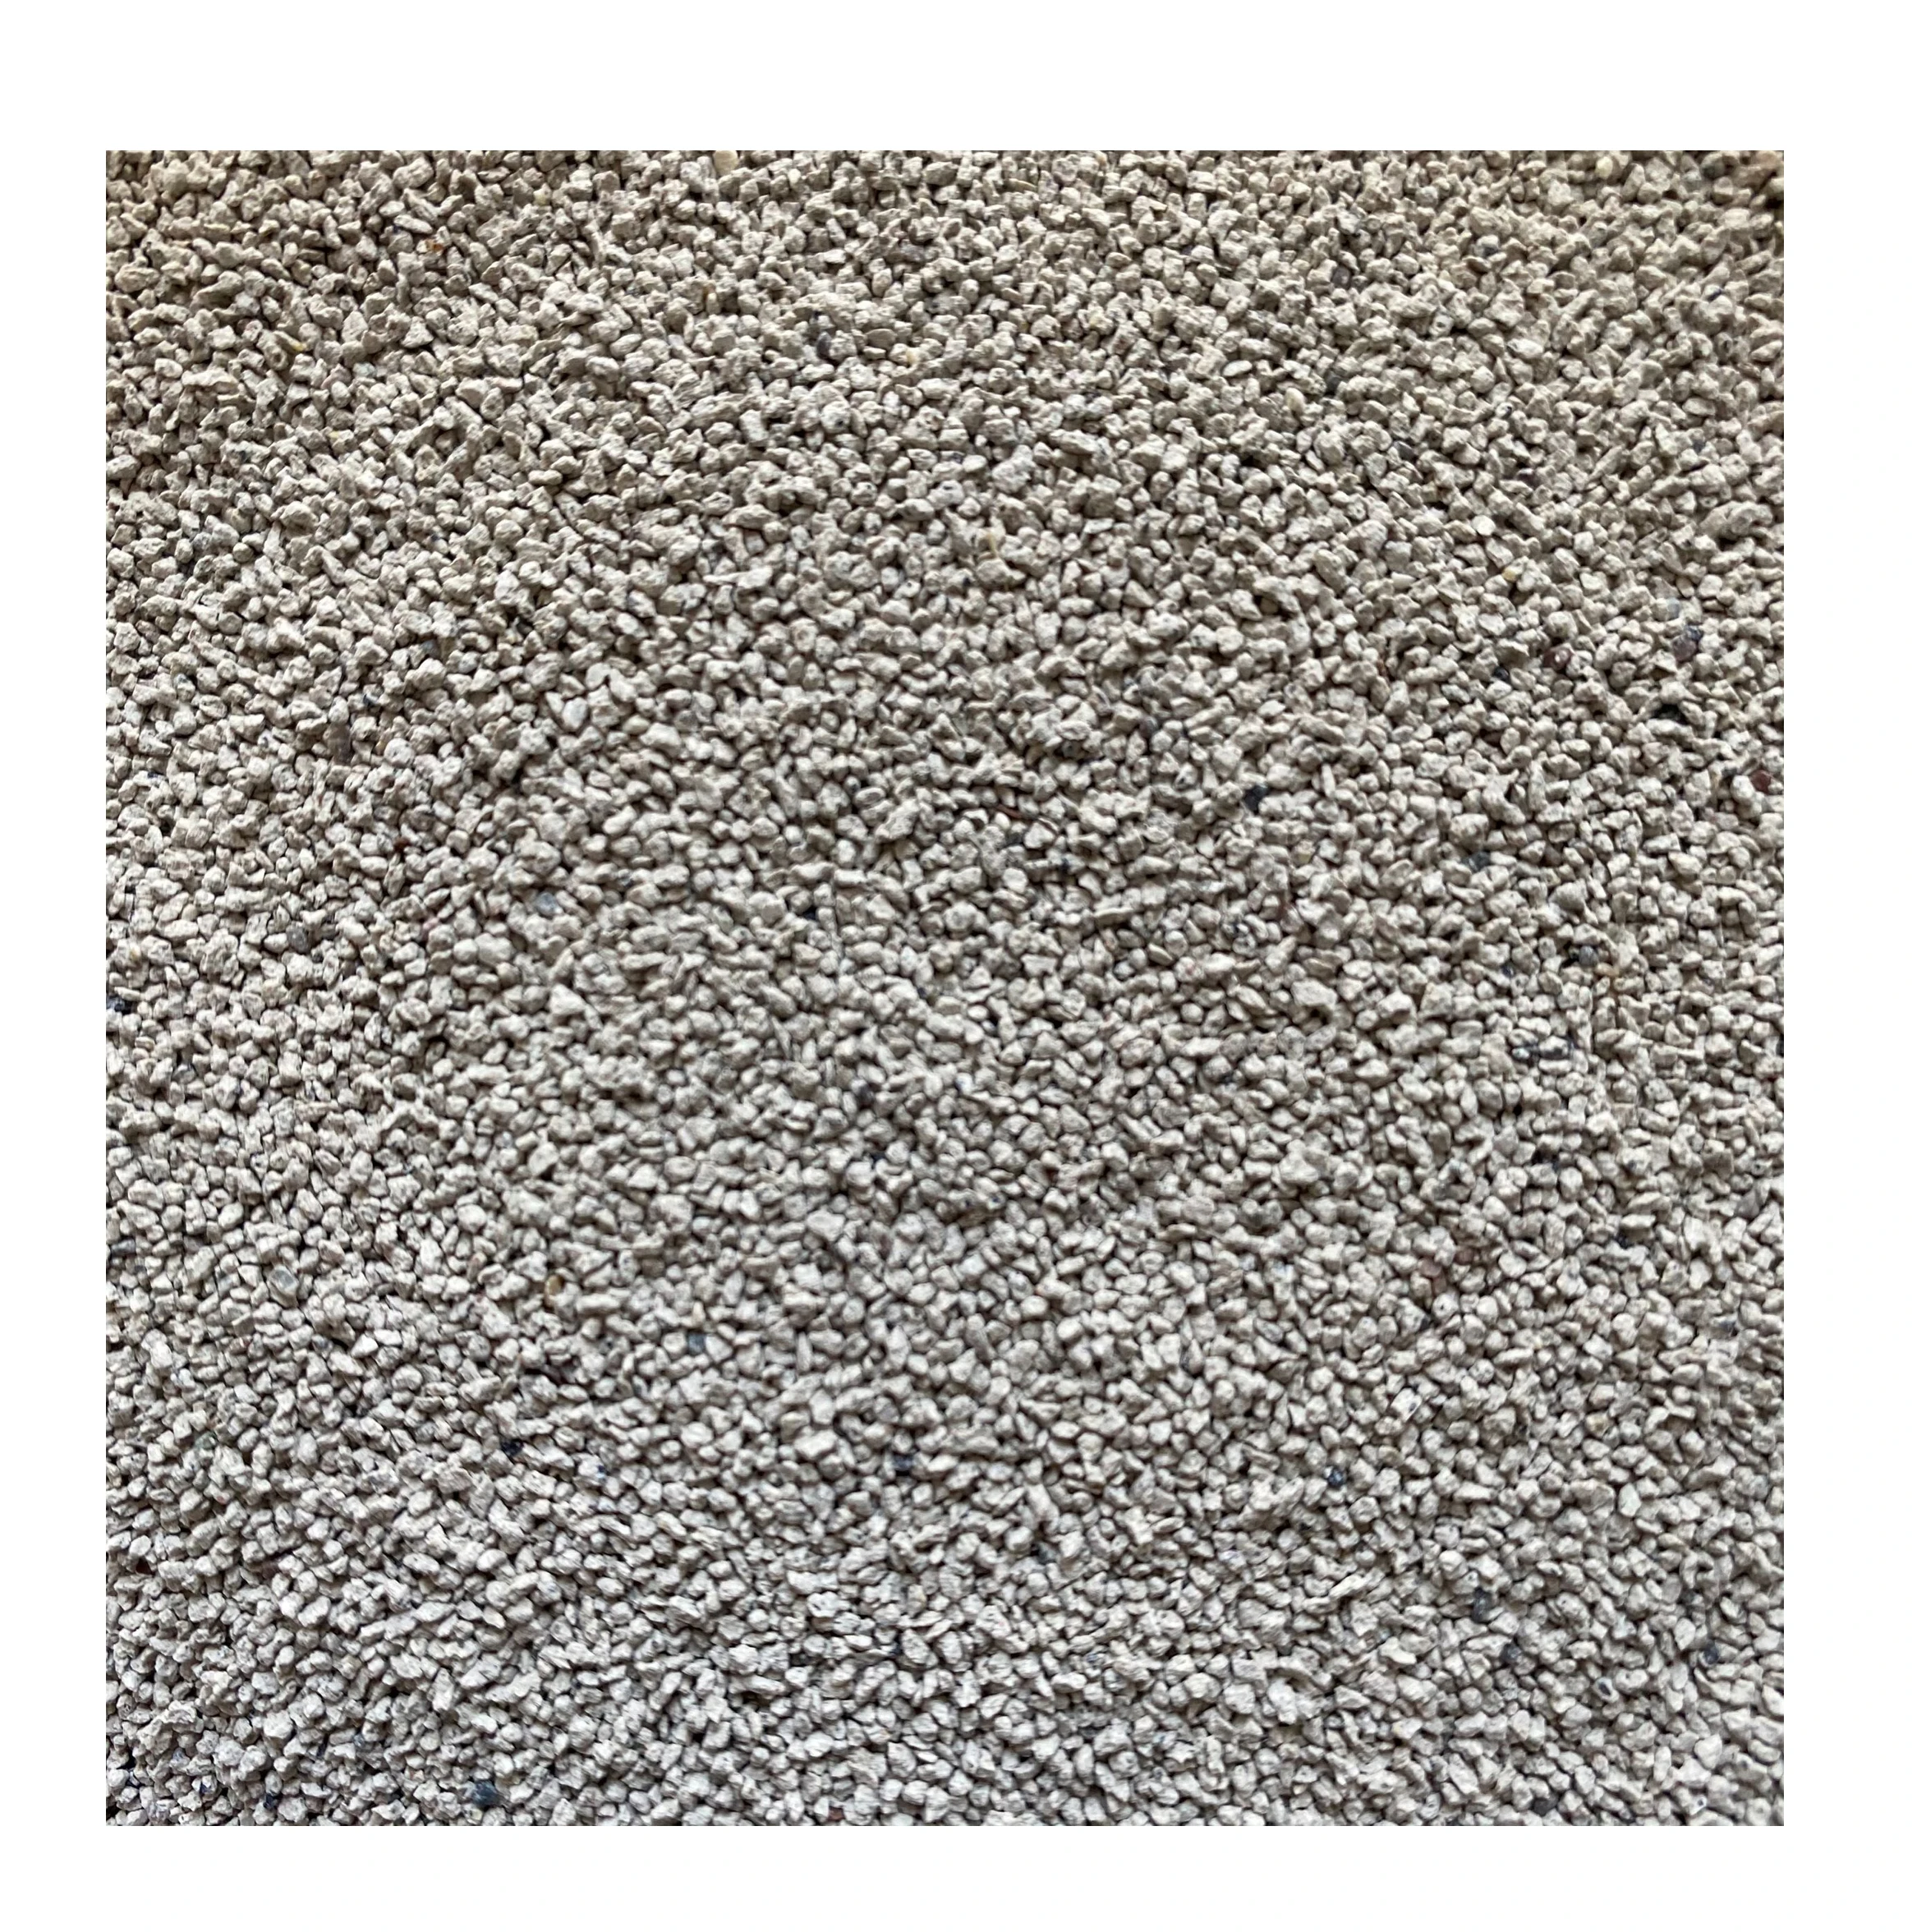 

High Quality & Best Price Bentonite Cat Litter Best Clean Cat Litter Clay Sand For Quick Clumping Bentonite Cat Litter Wholesale, Grayish, can add pink and blue beads